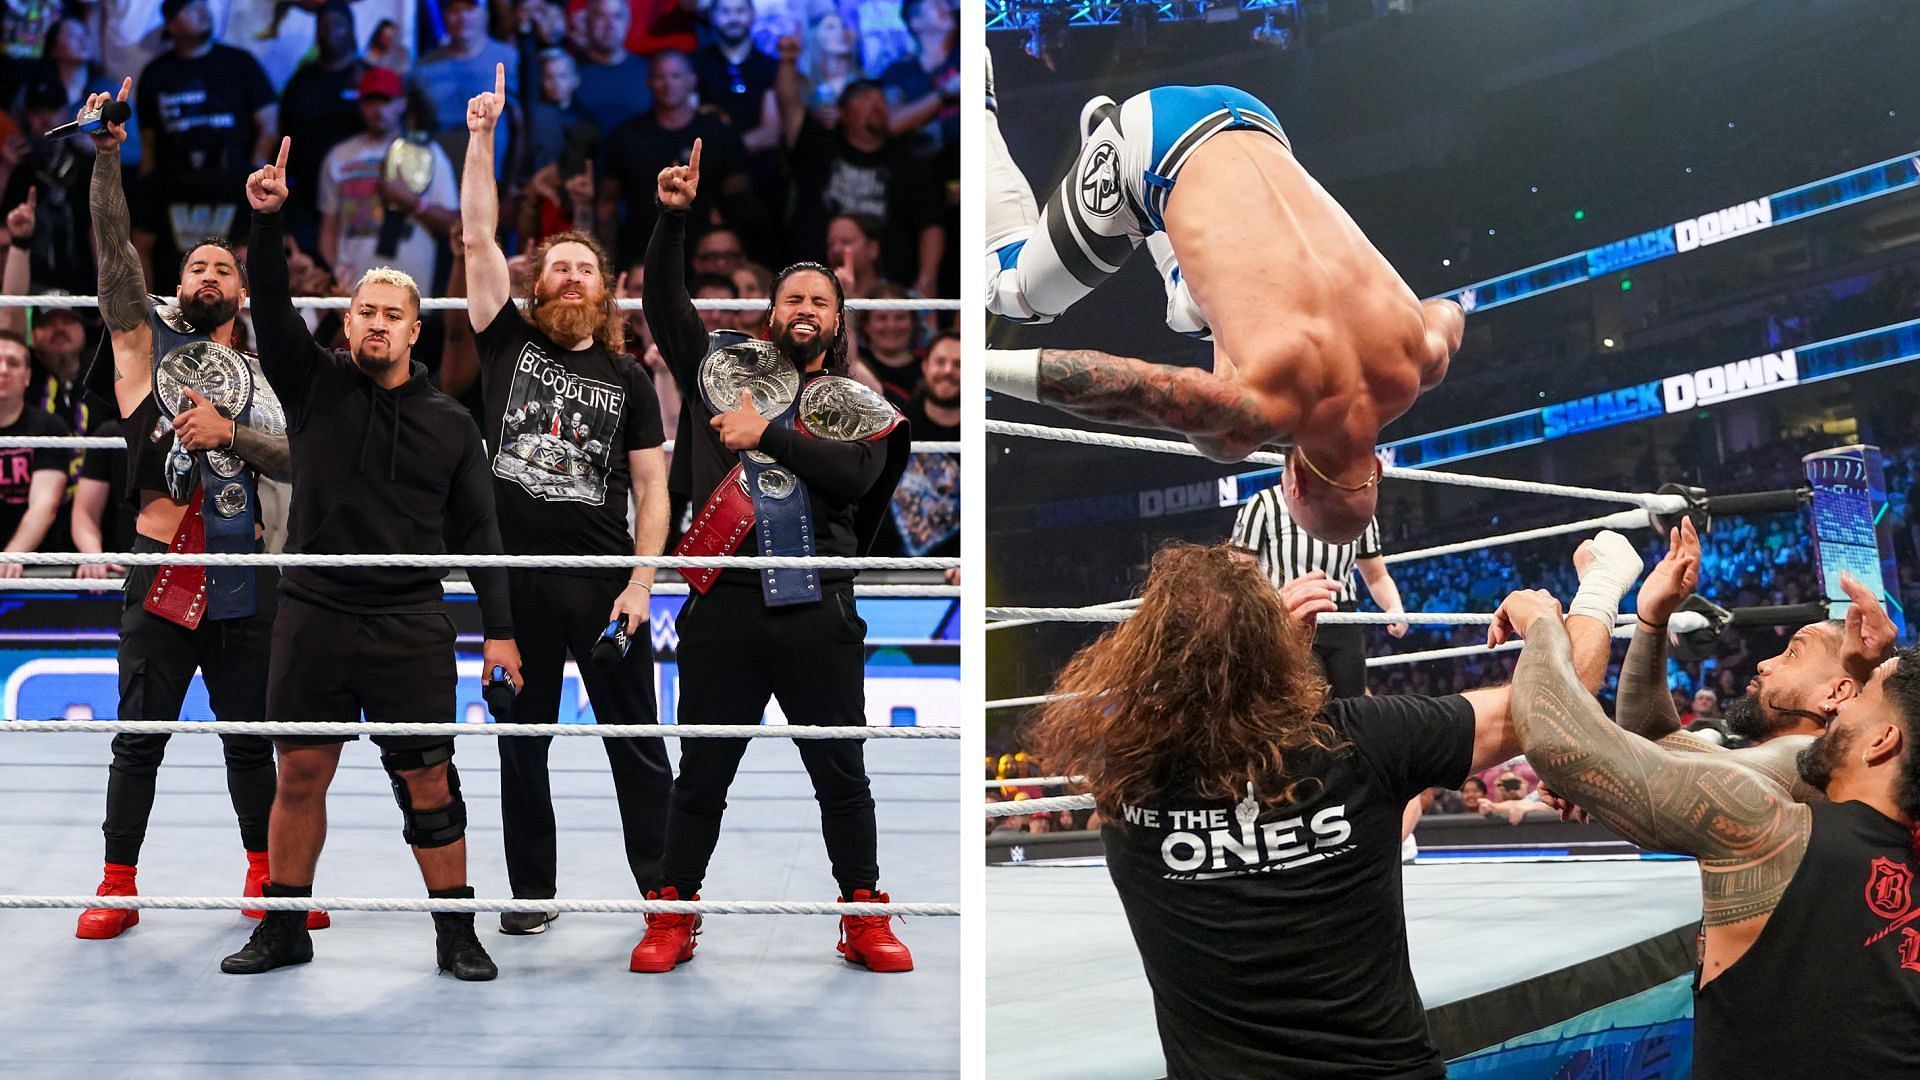 The Bloodline will take on Ricochet and Madcap Moss on WWE SmackDown